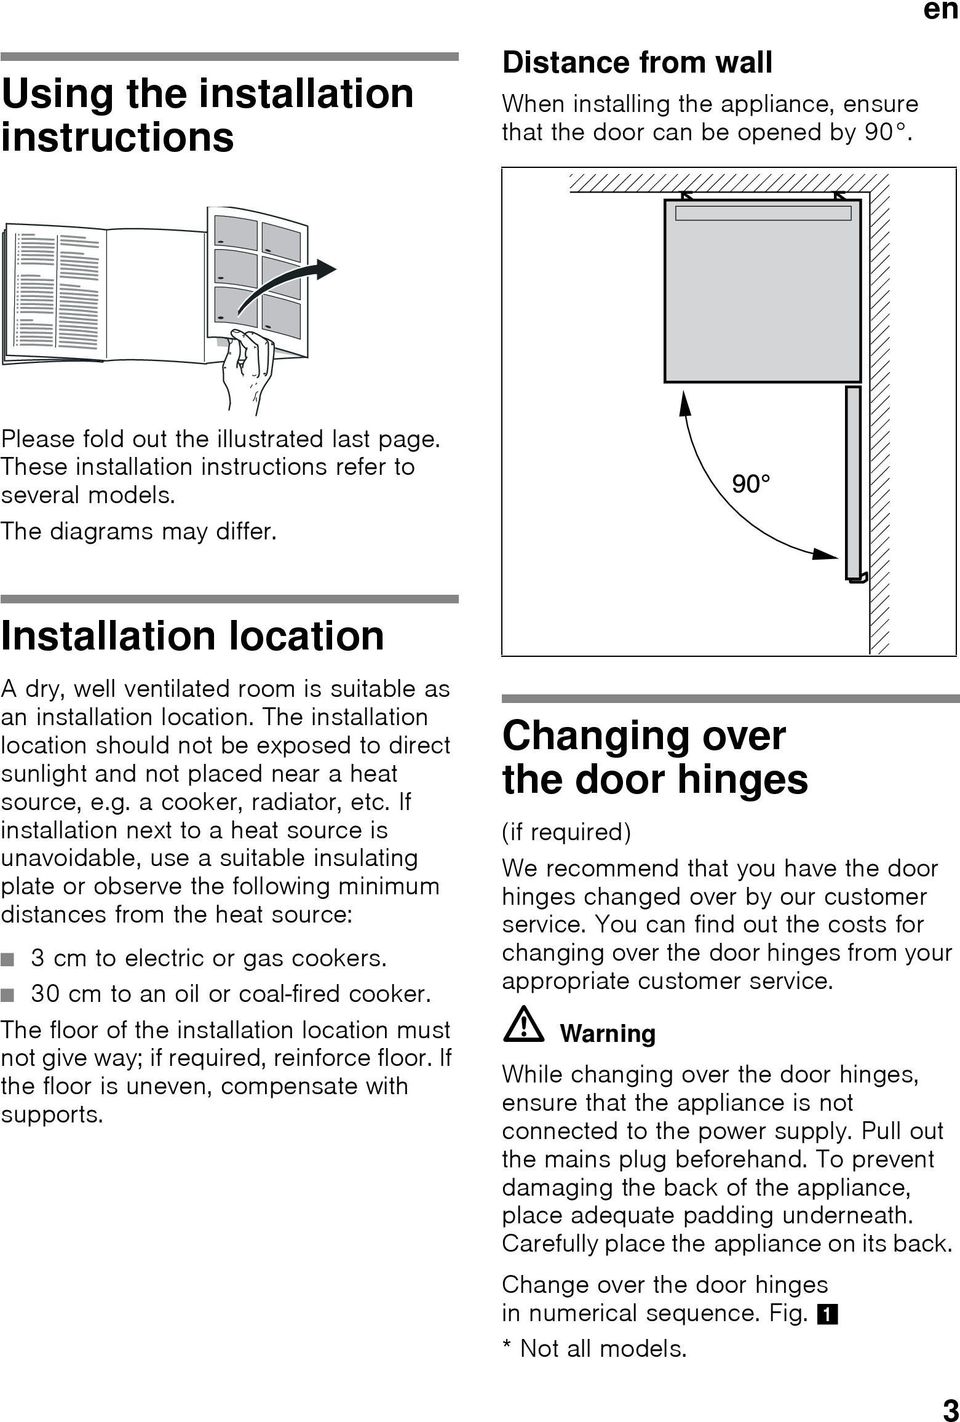 Installation location A dry, well ventilated room is suitable as an installation location. The installation location should not be exposed to direct sunlight and not placed near a heat source, e.g. a cooker, radiator, etc.